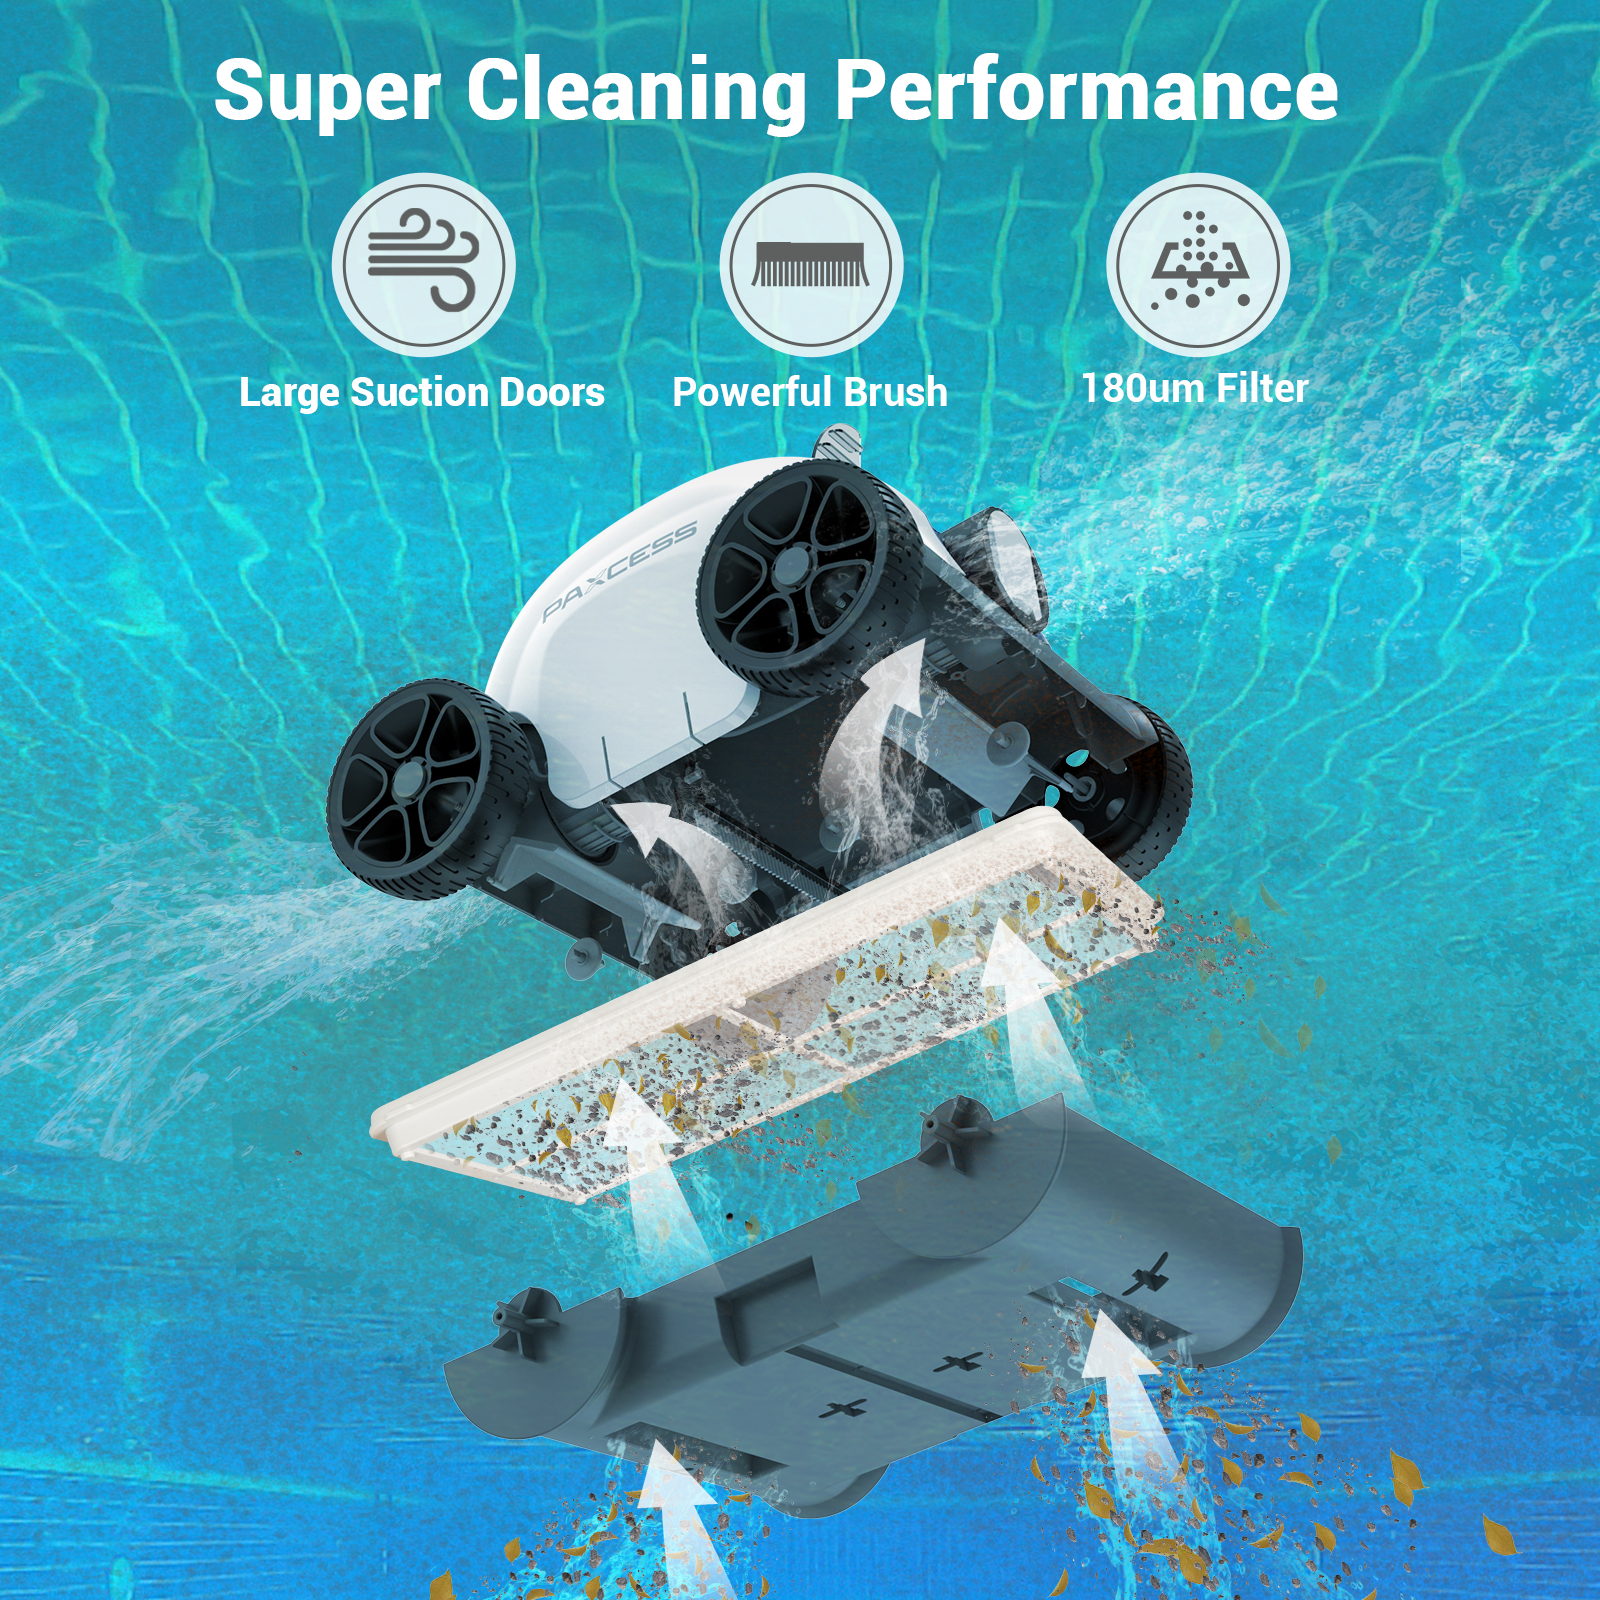 Paxcess Cordless Automatic Robotic Pool Cleaner for in-Ground and Above Ground Swimming Pool - image 3 of 7